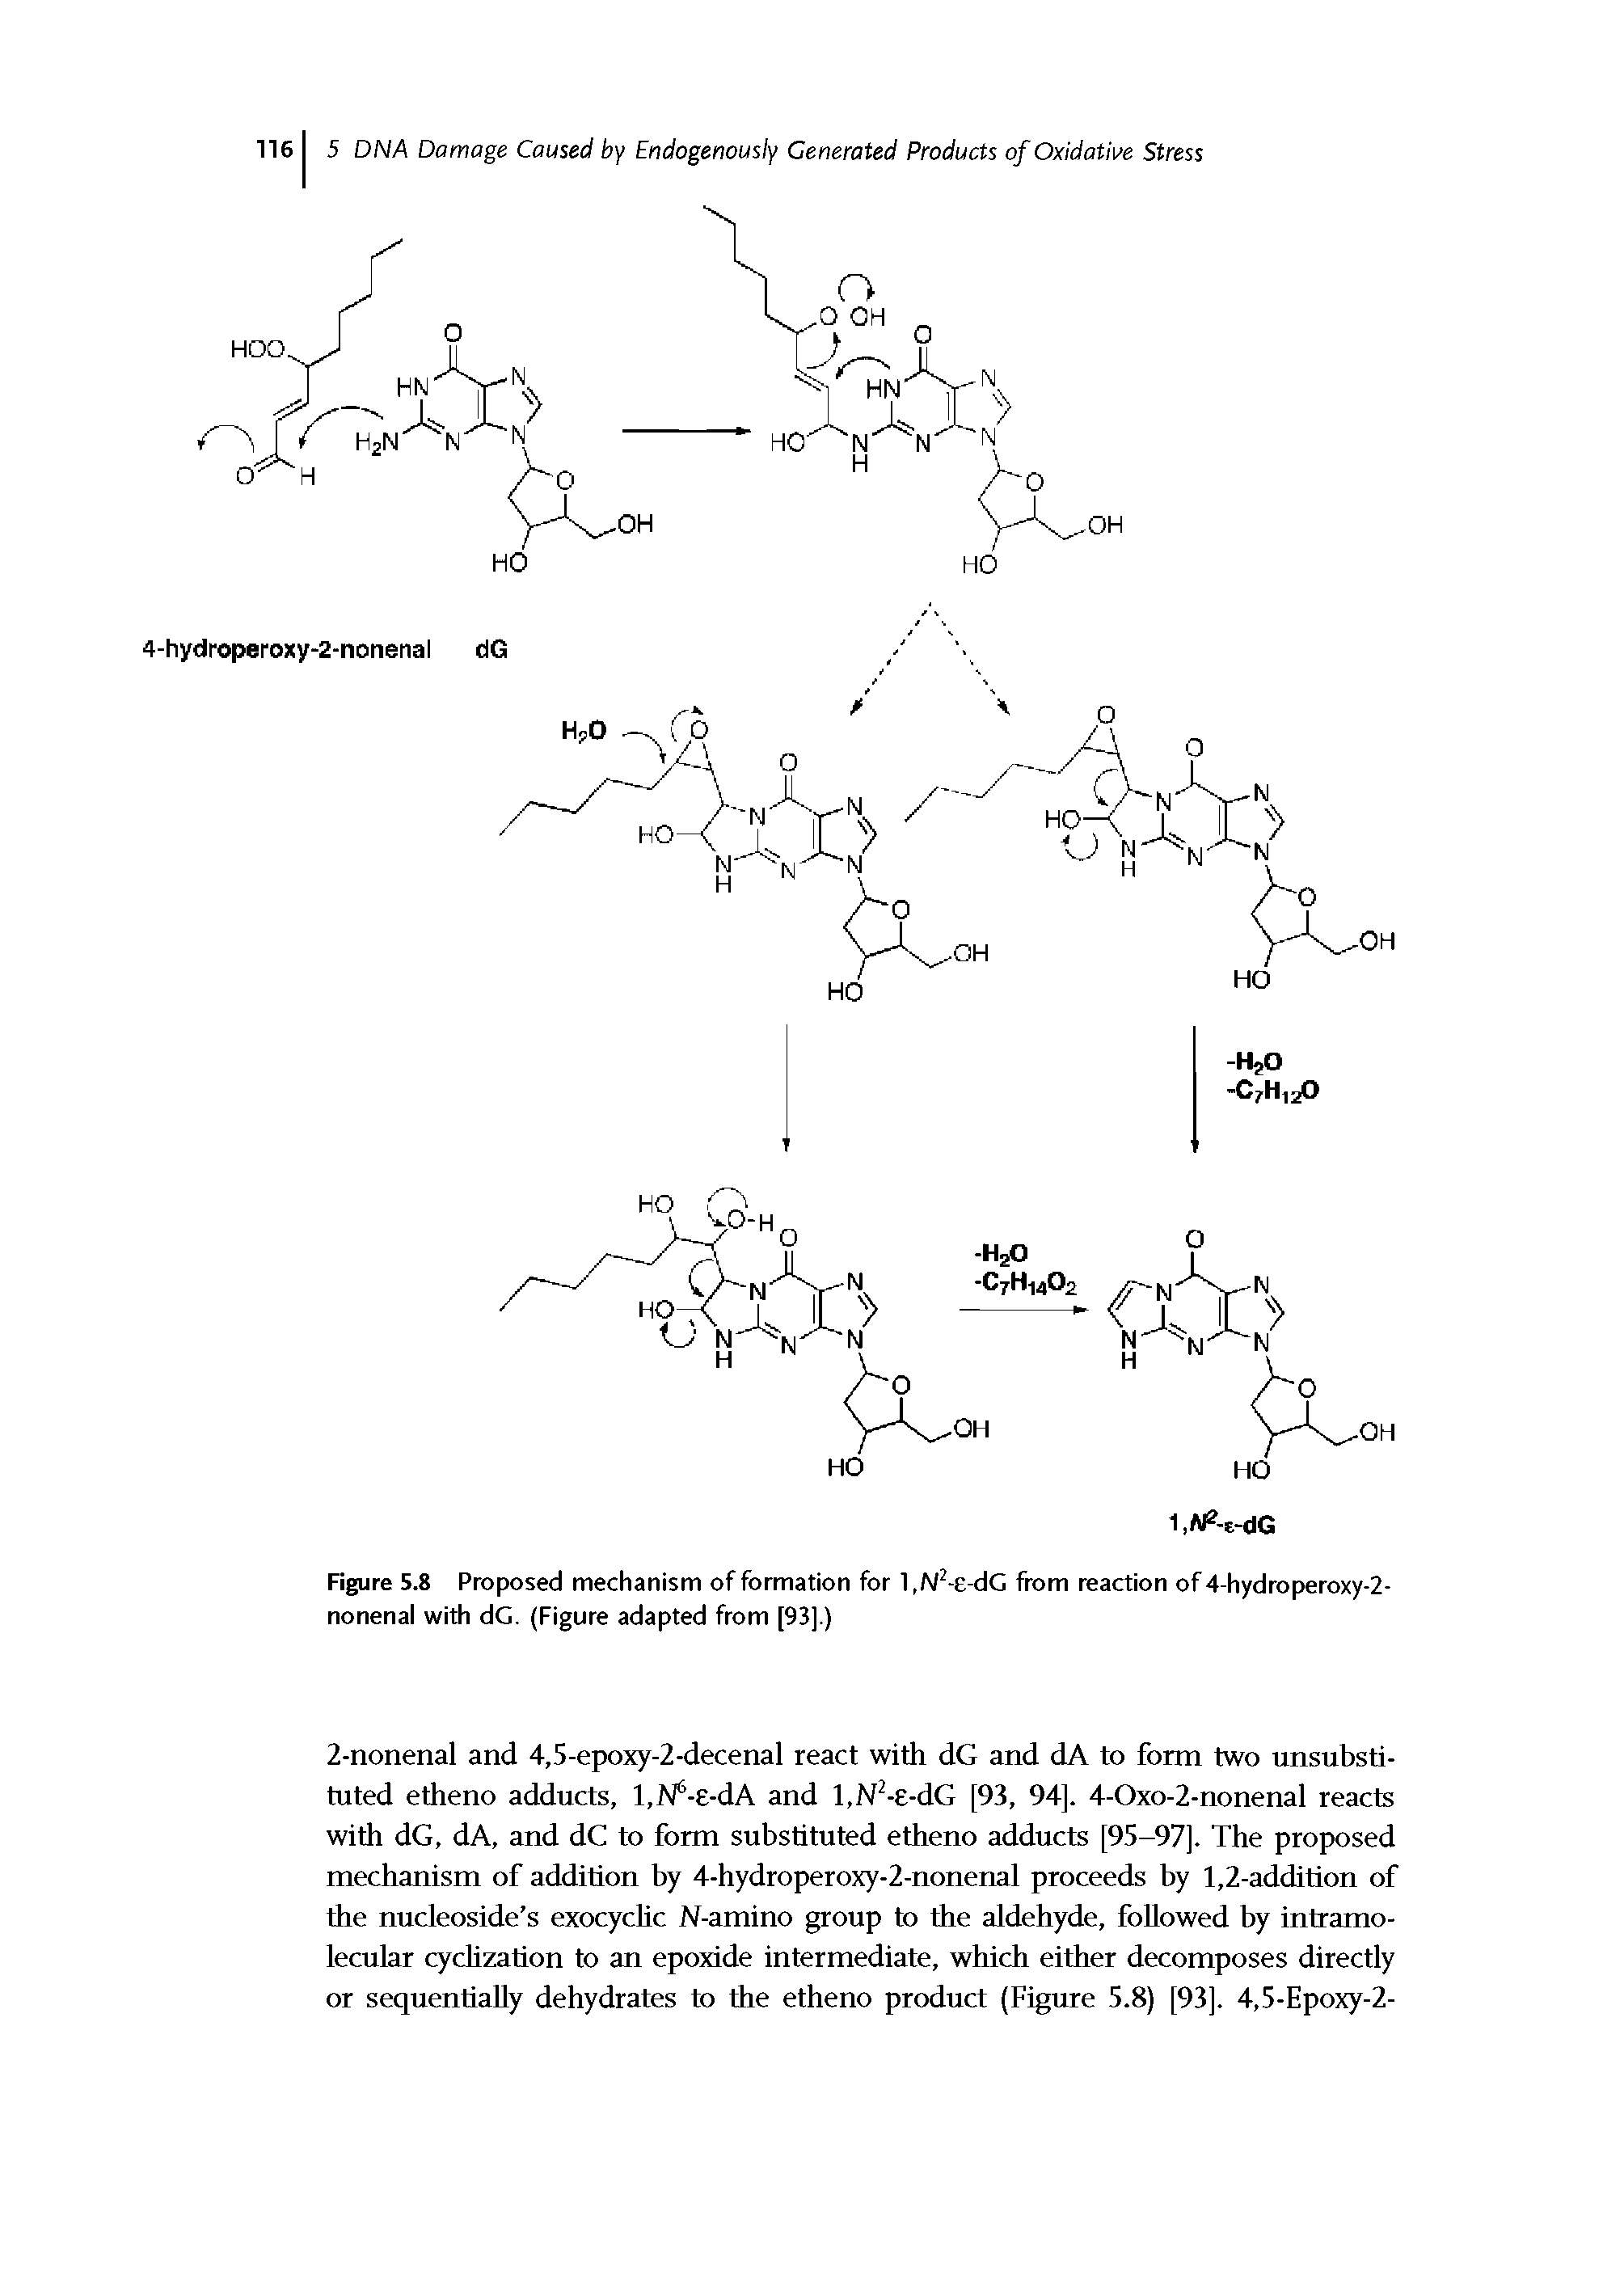 Figure 5.8 Proposed mechanism of formation for 1,N2-e-dG from reaction of 4-hydroperoxy-2-nonenal with dG. (Figure adapted from [93].)...